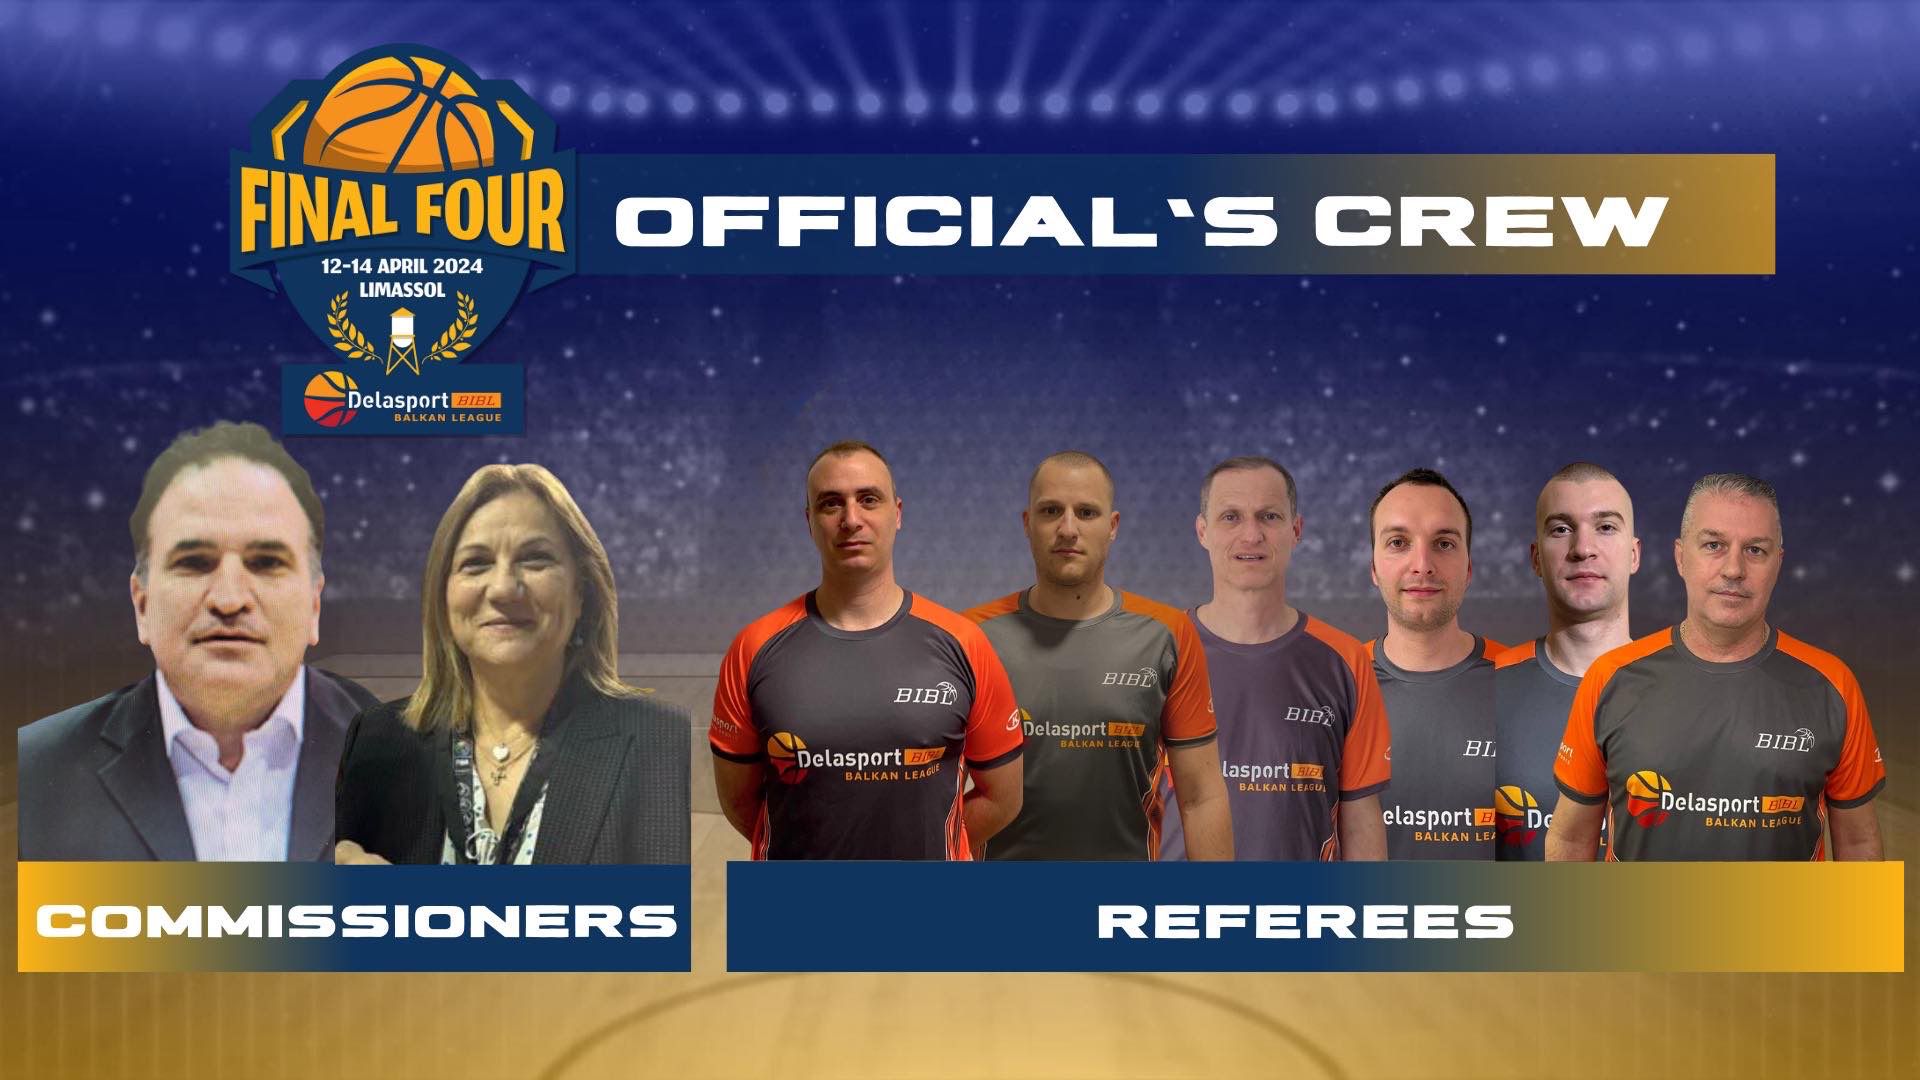 Officiating crew announced for Final 4